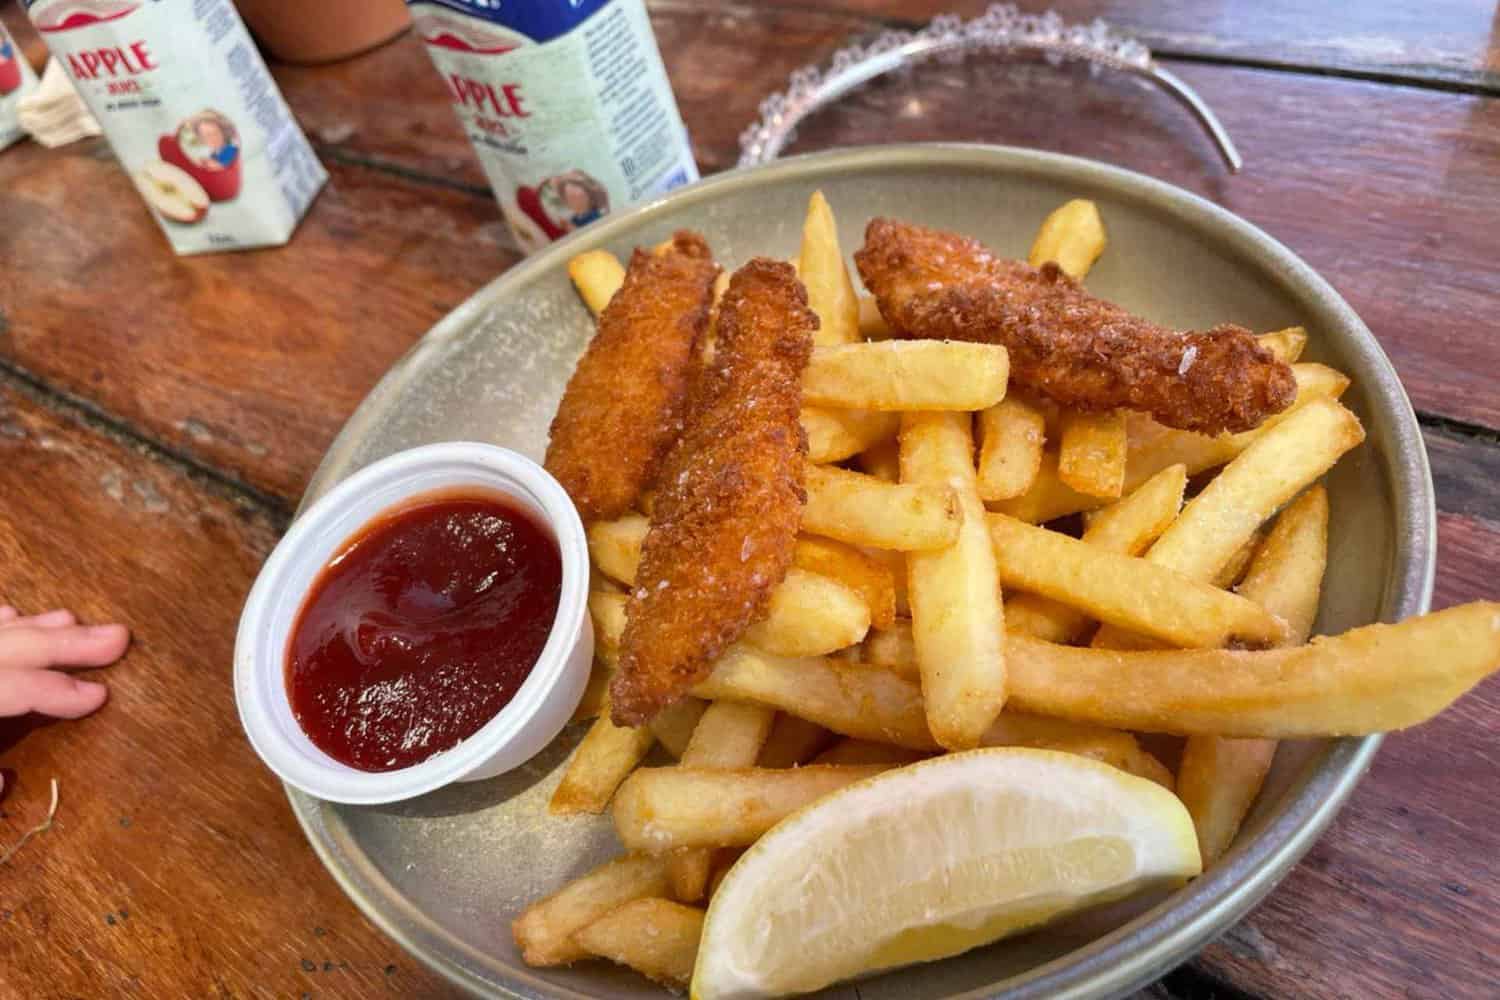 A delicious serve of kids fish and chips served at a Margaret River brewery, with crispy crumb and golden fries. The dish is garnished with fresh lemon and served with a side of tomato sauce.